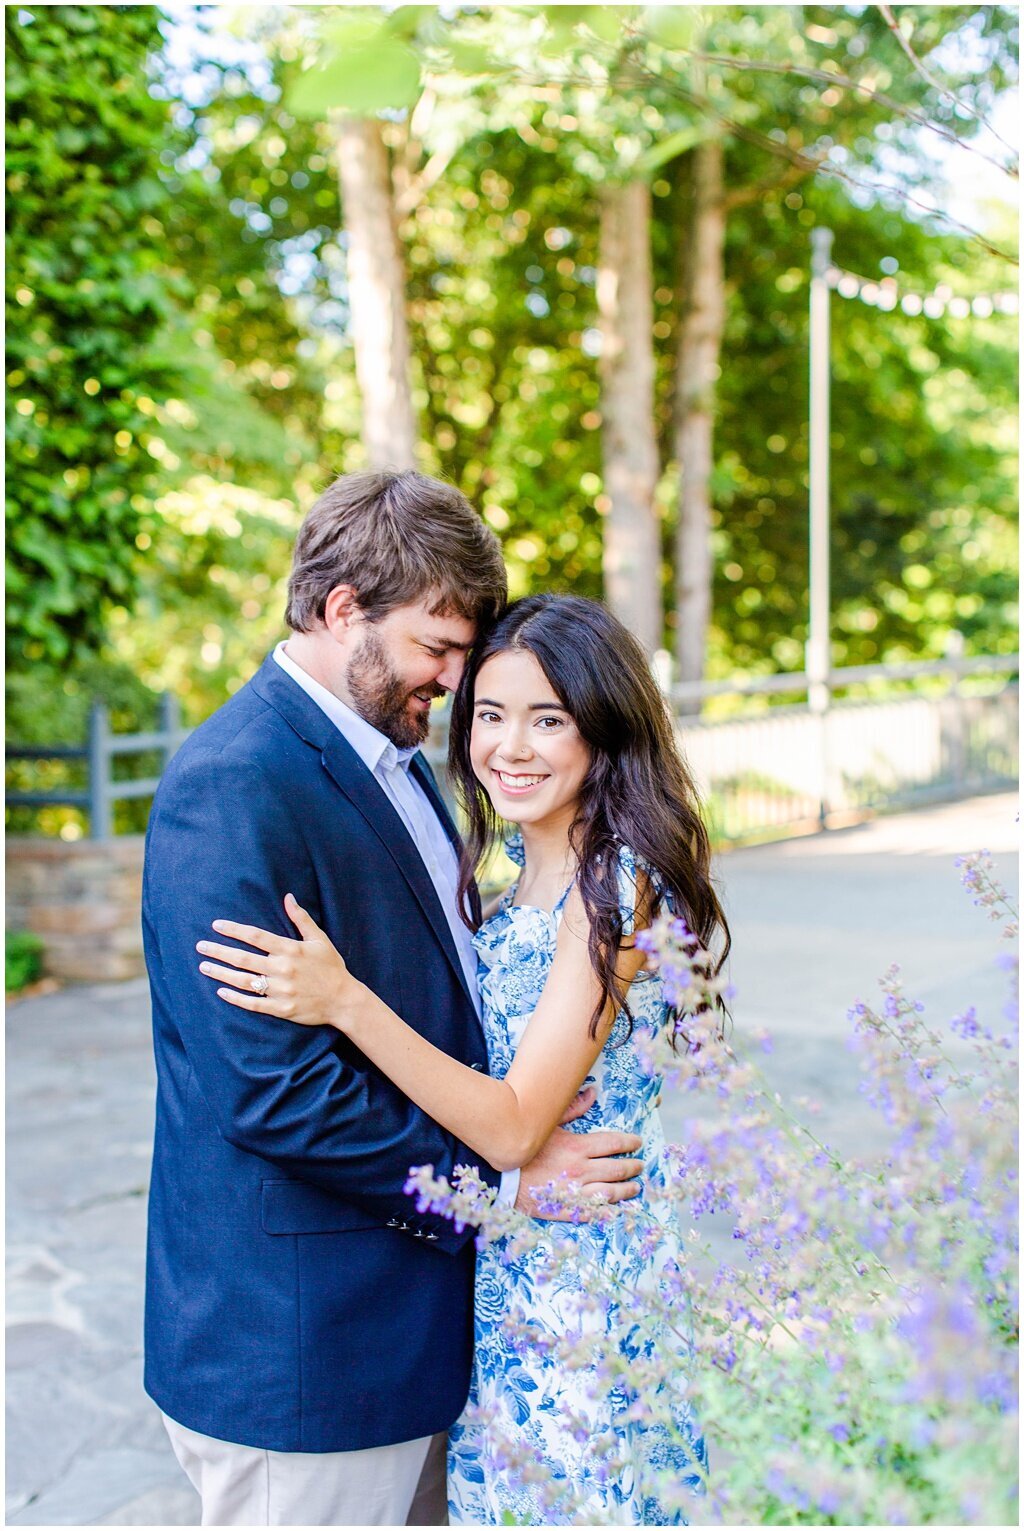 Greenville, SC engagement photographer | Tracy Waldrop Photography